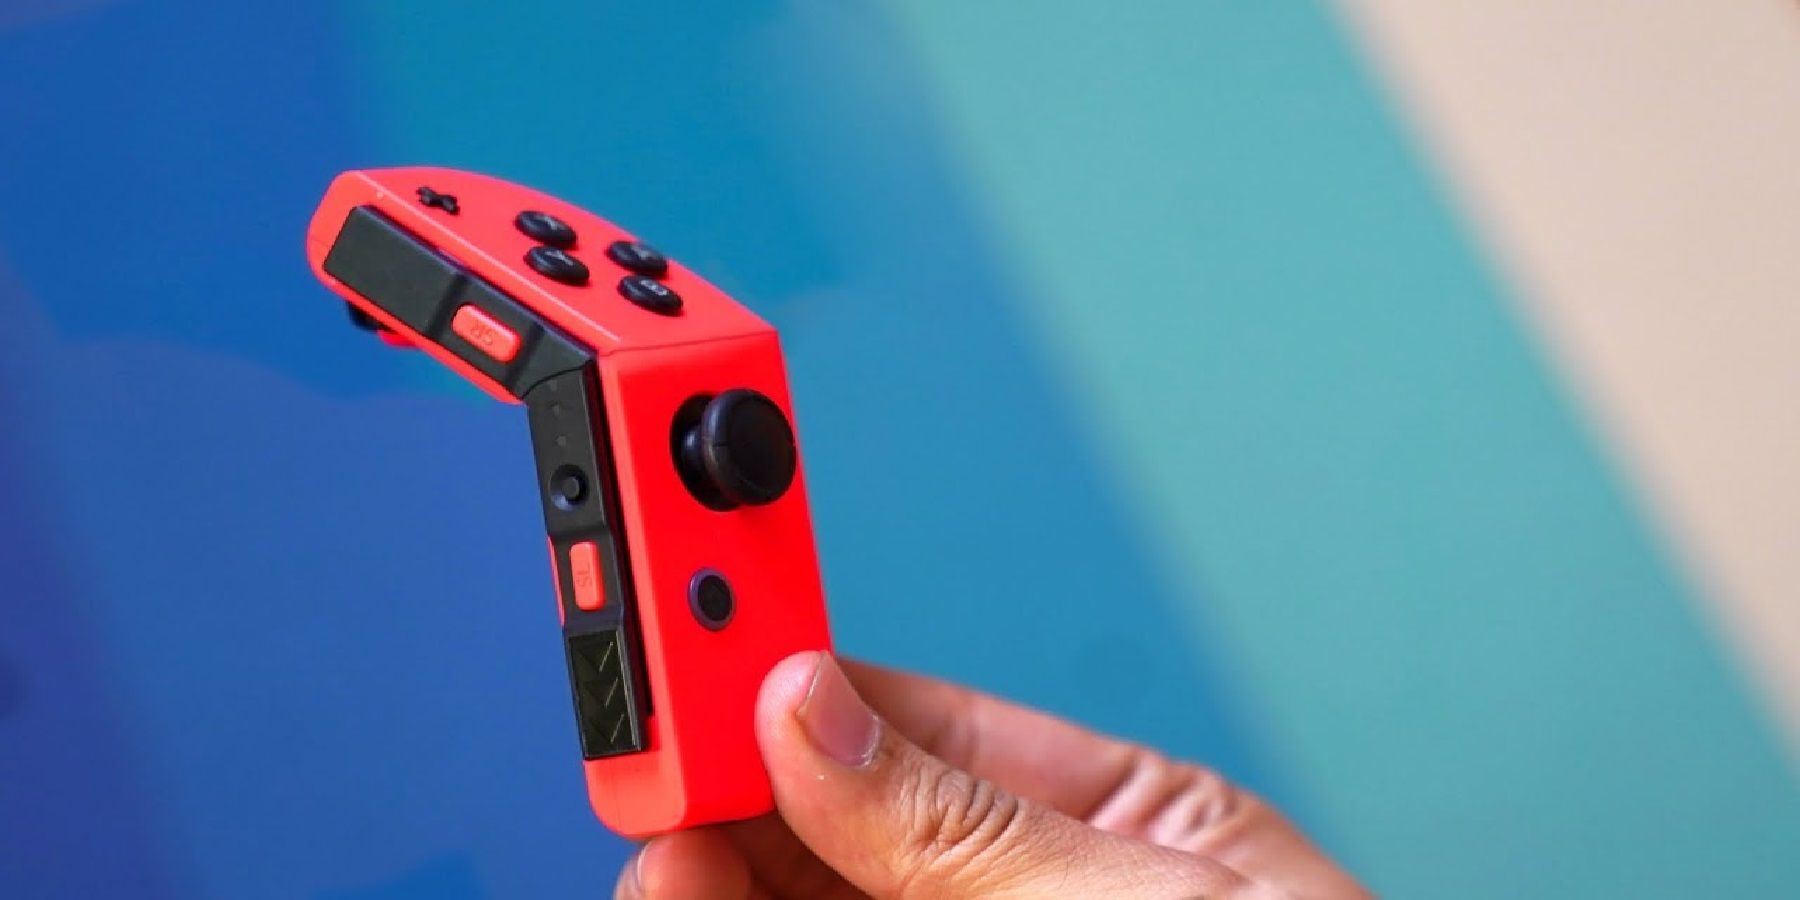 New Survey States 40 Percent of Switch Users Experience JoyCon Drift